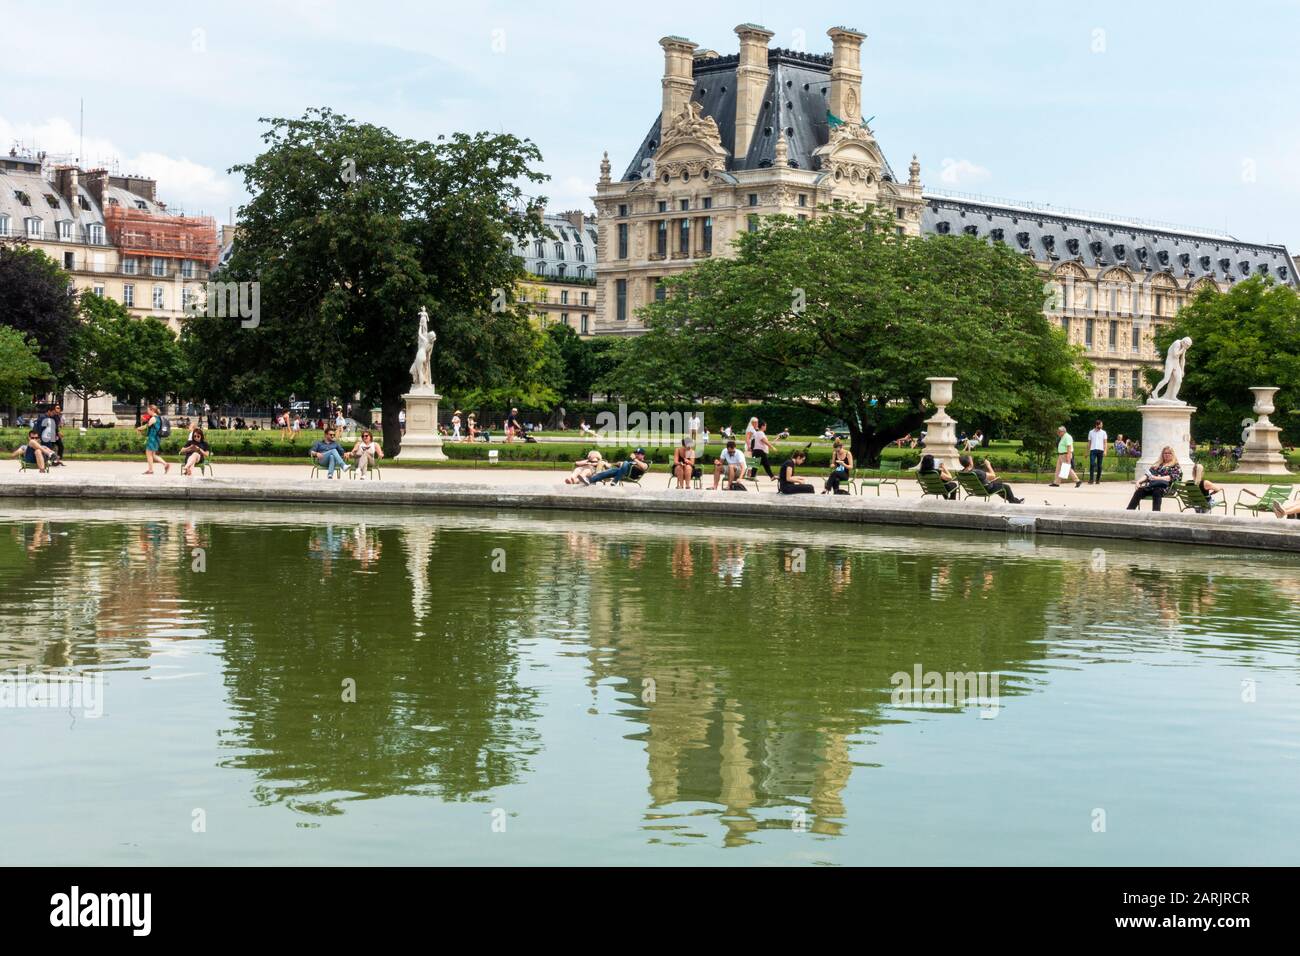 Grand Bassin Rond in Tuileries Garden (Jardin des Tuileries) with Richelieu Wing of the Louvre Museum in background, Tuileries Quarter, Paris, France Stock Photo